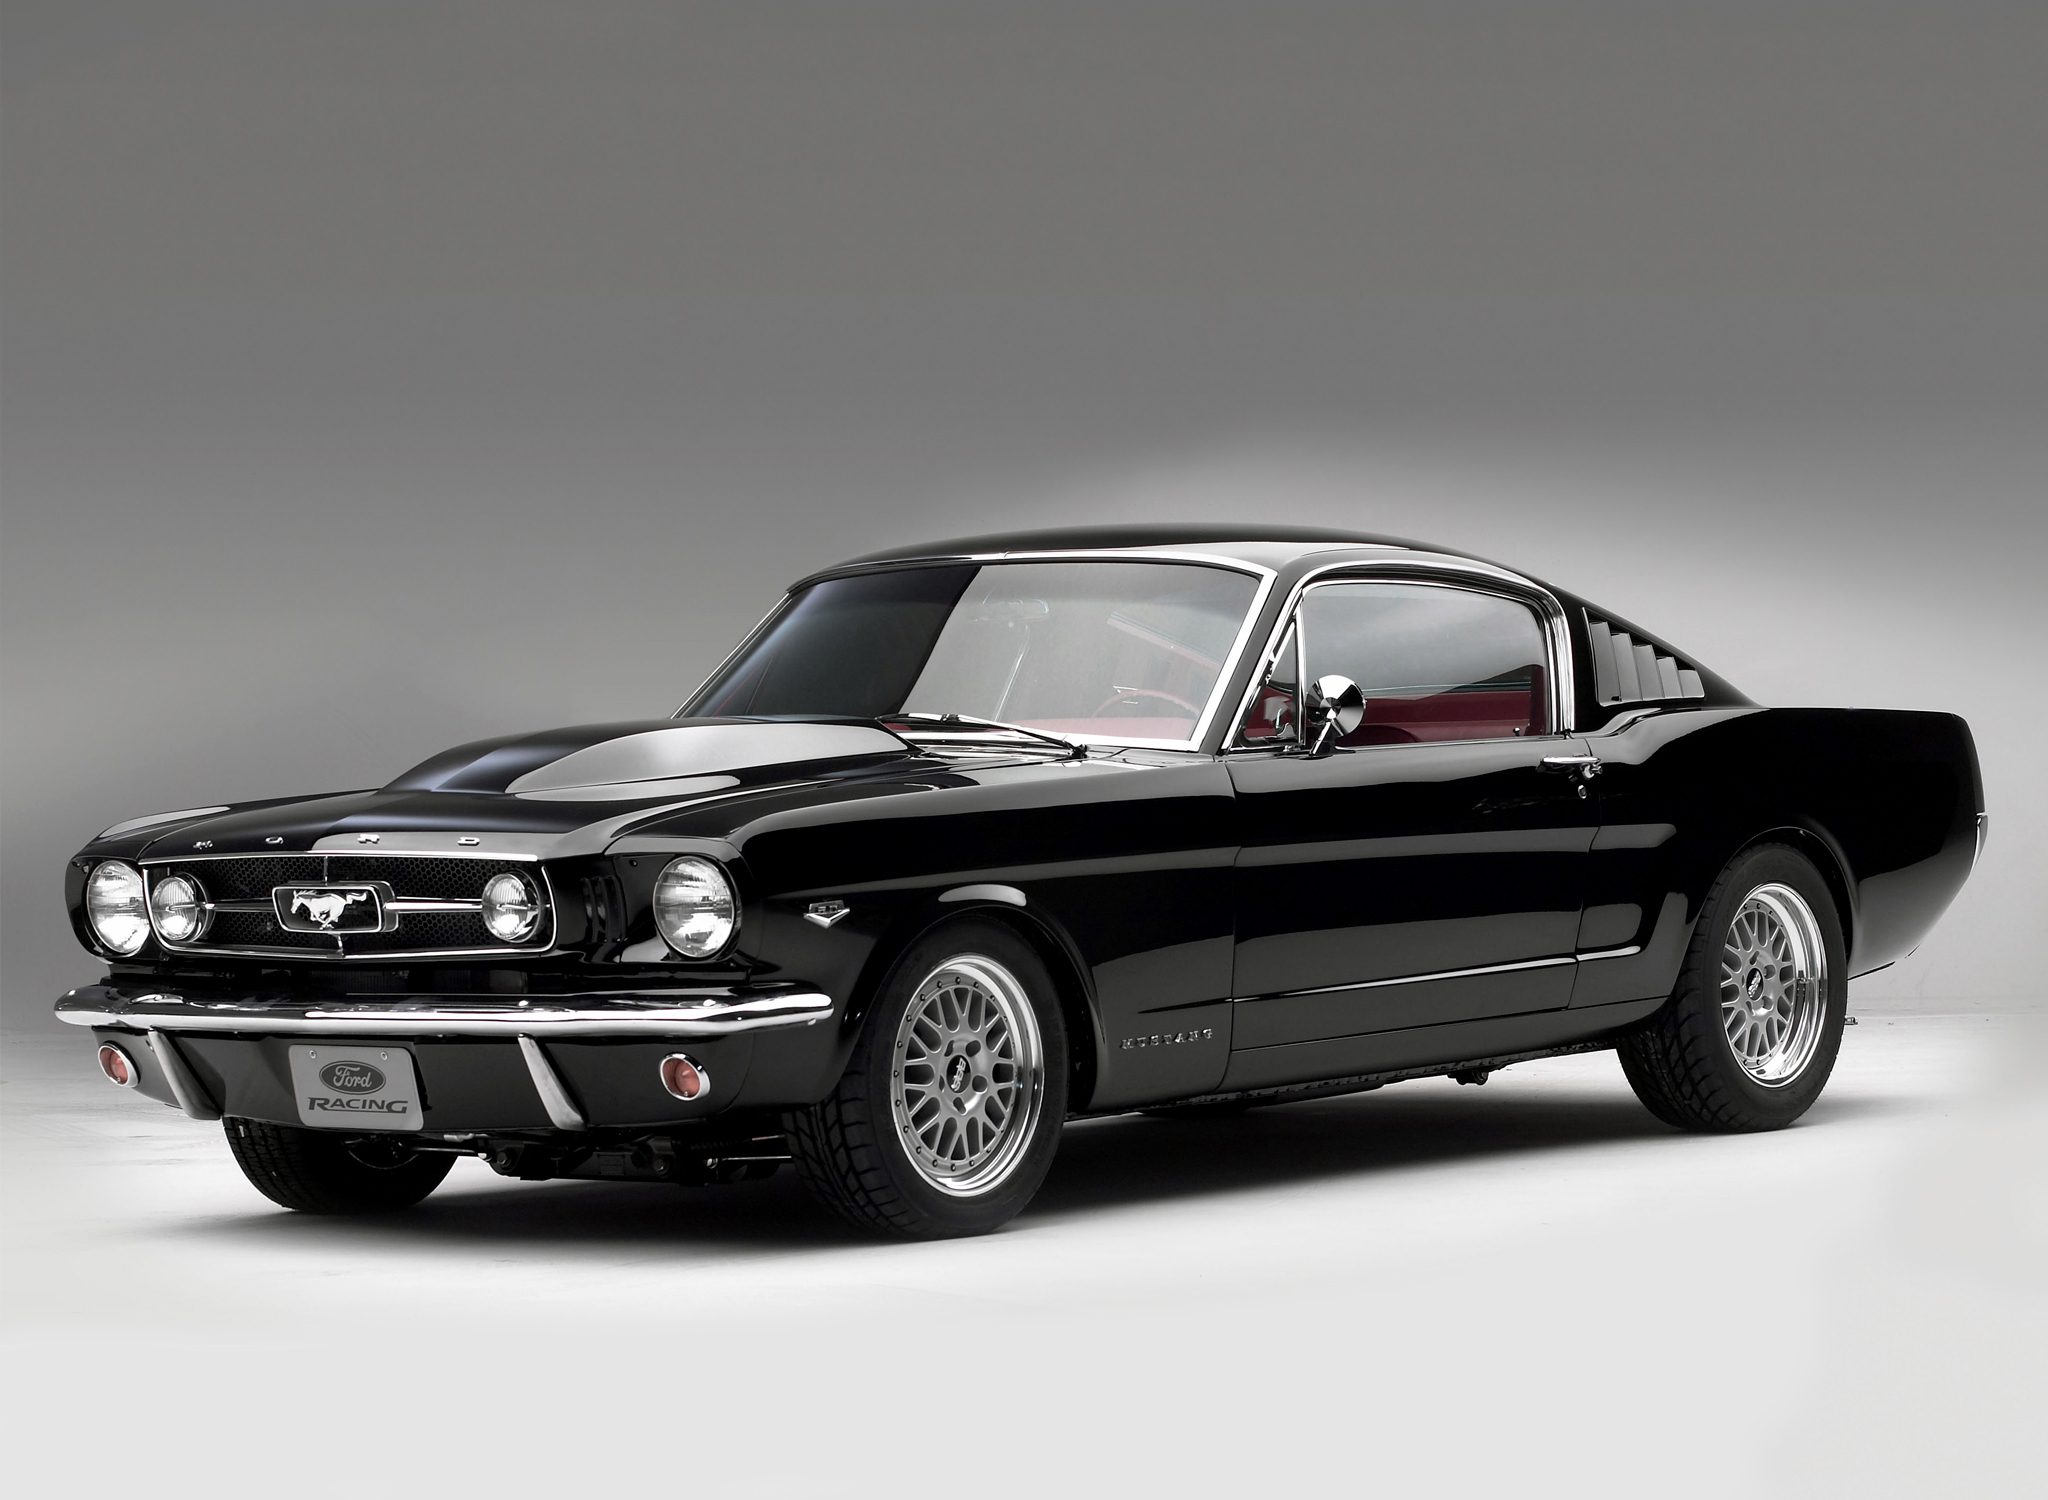 Mustang Of The Day: 2003 Ford Mustang Fastback Concept